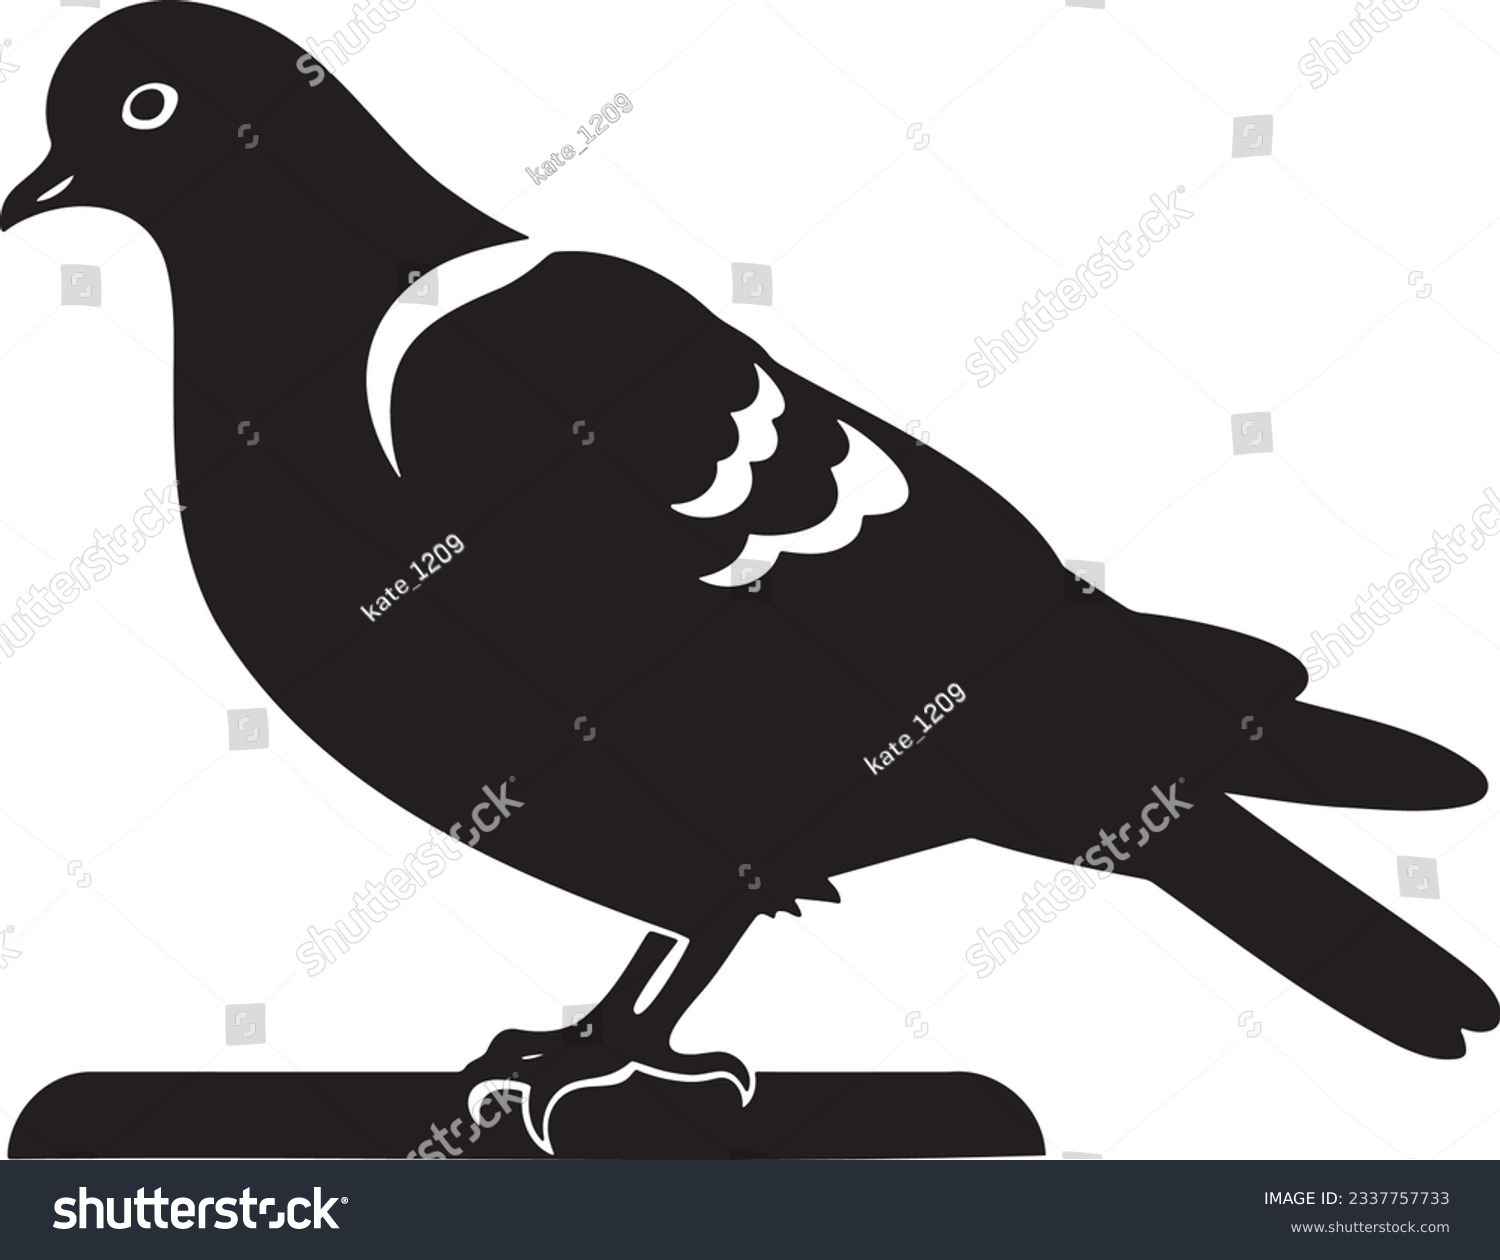 SVG of Pigeon perched on a ledge, Basic simple Minimalist vector graphic, isolated on white background, black and white svg